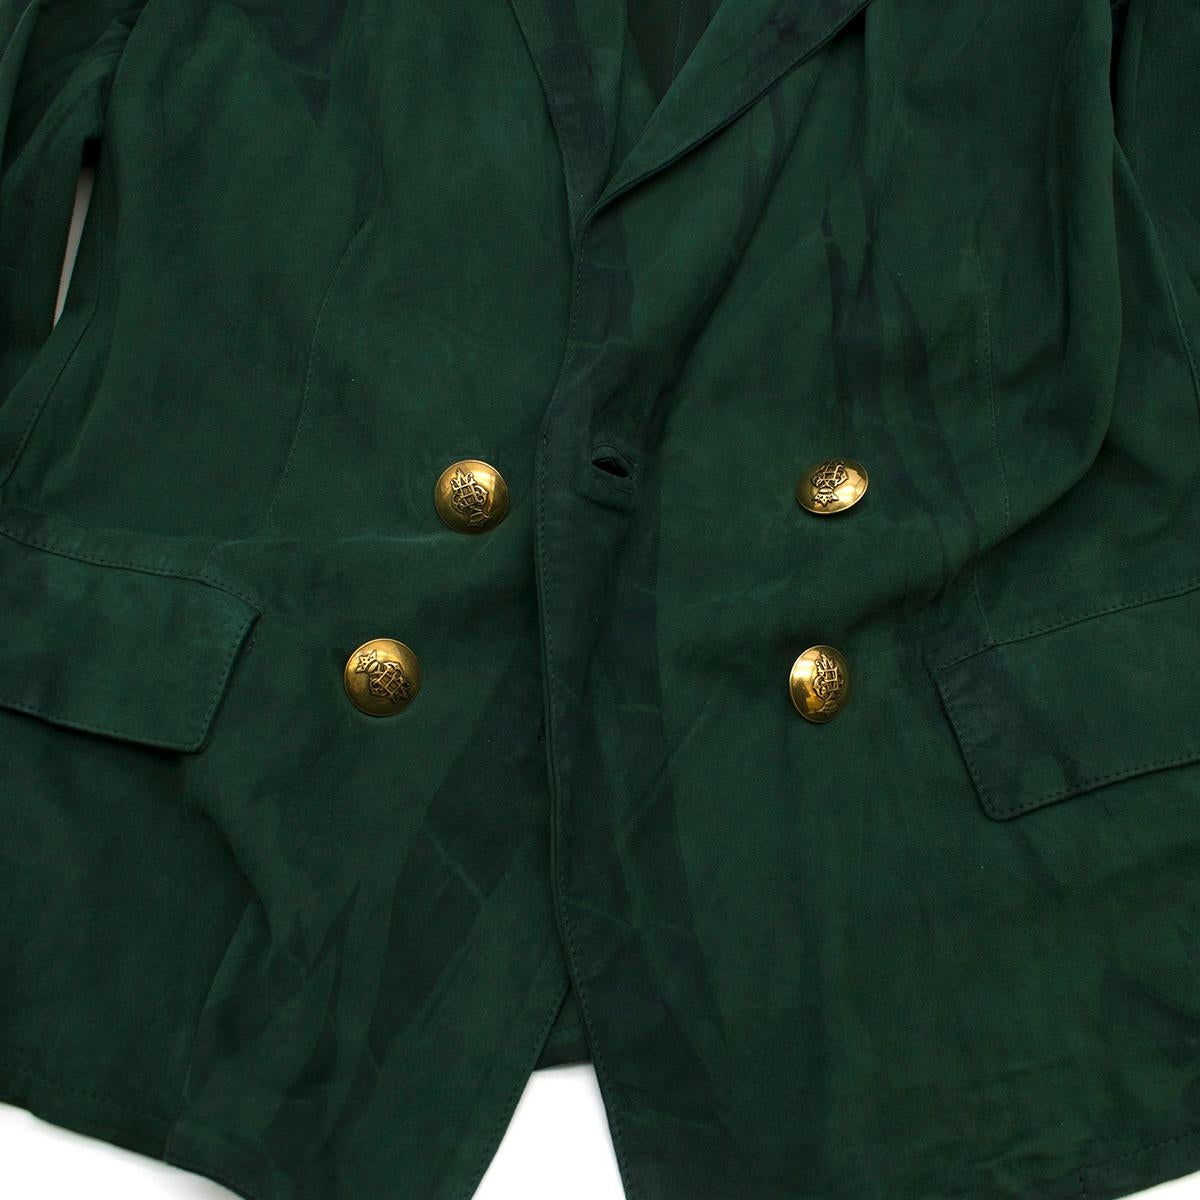 Women's Emilio Pucci Green Double-Breasted Suede Blazer Jacket UK 10